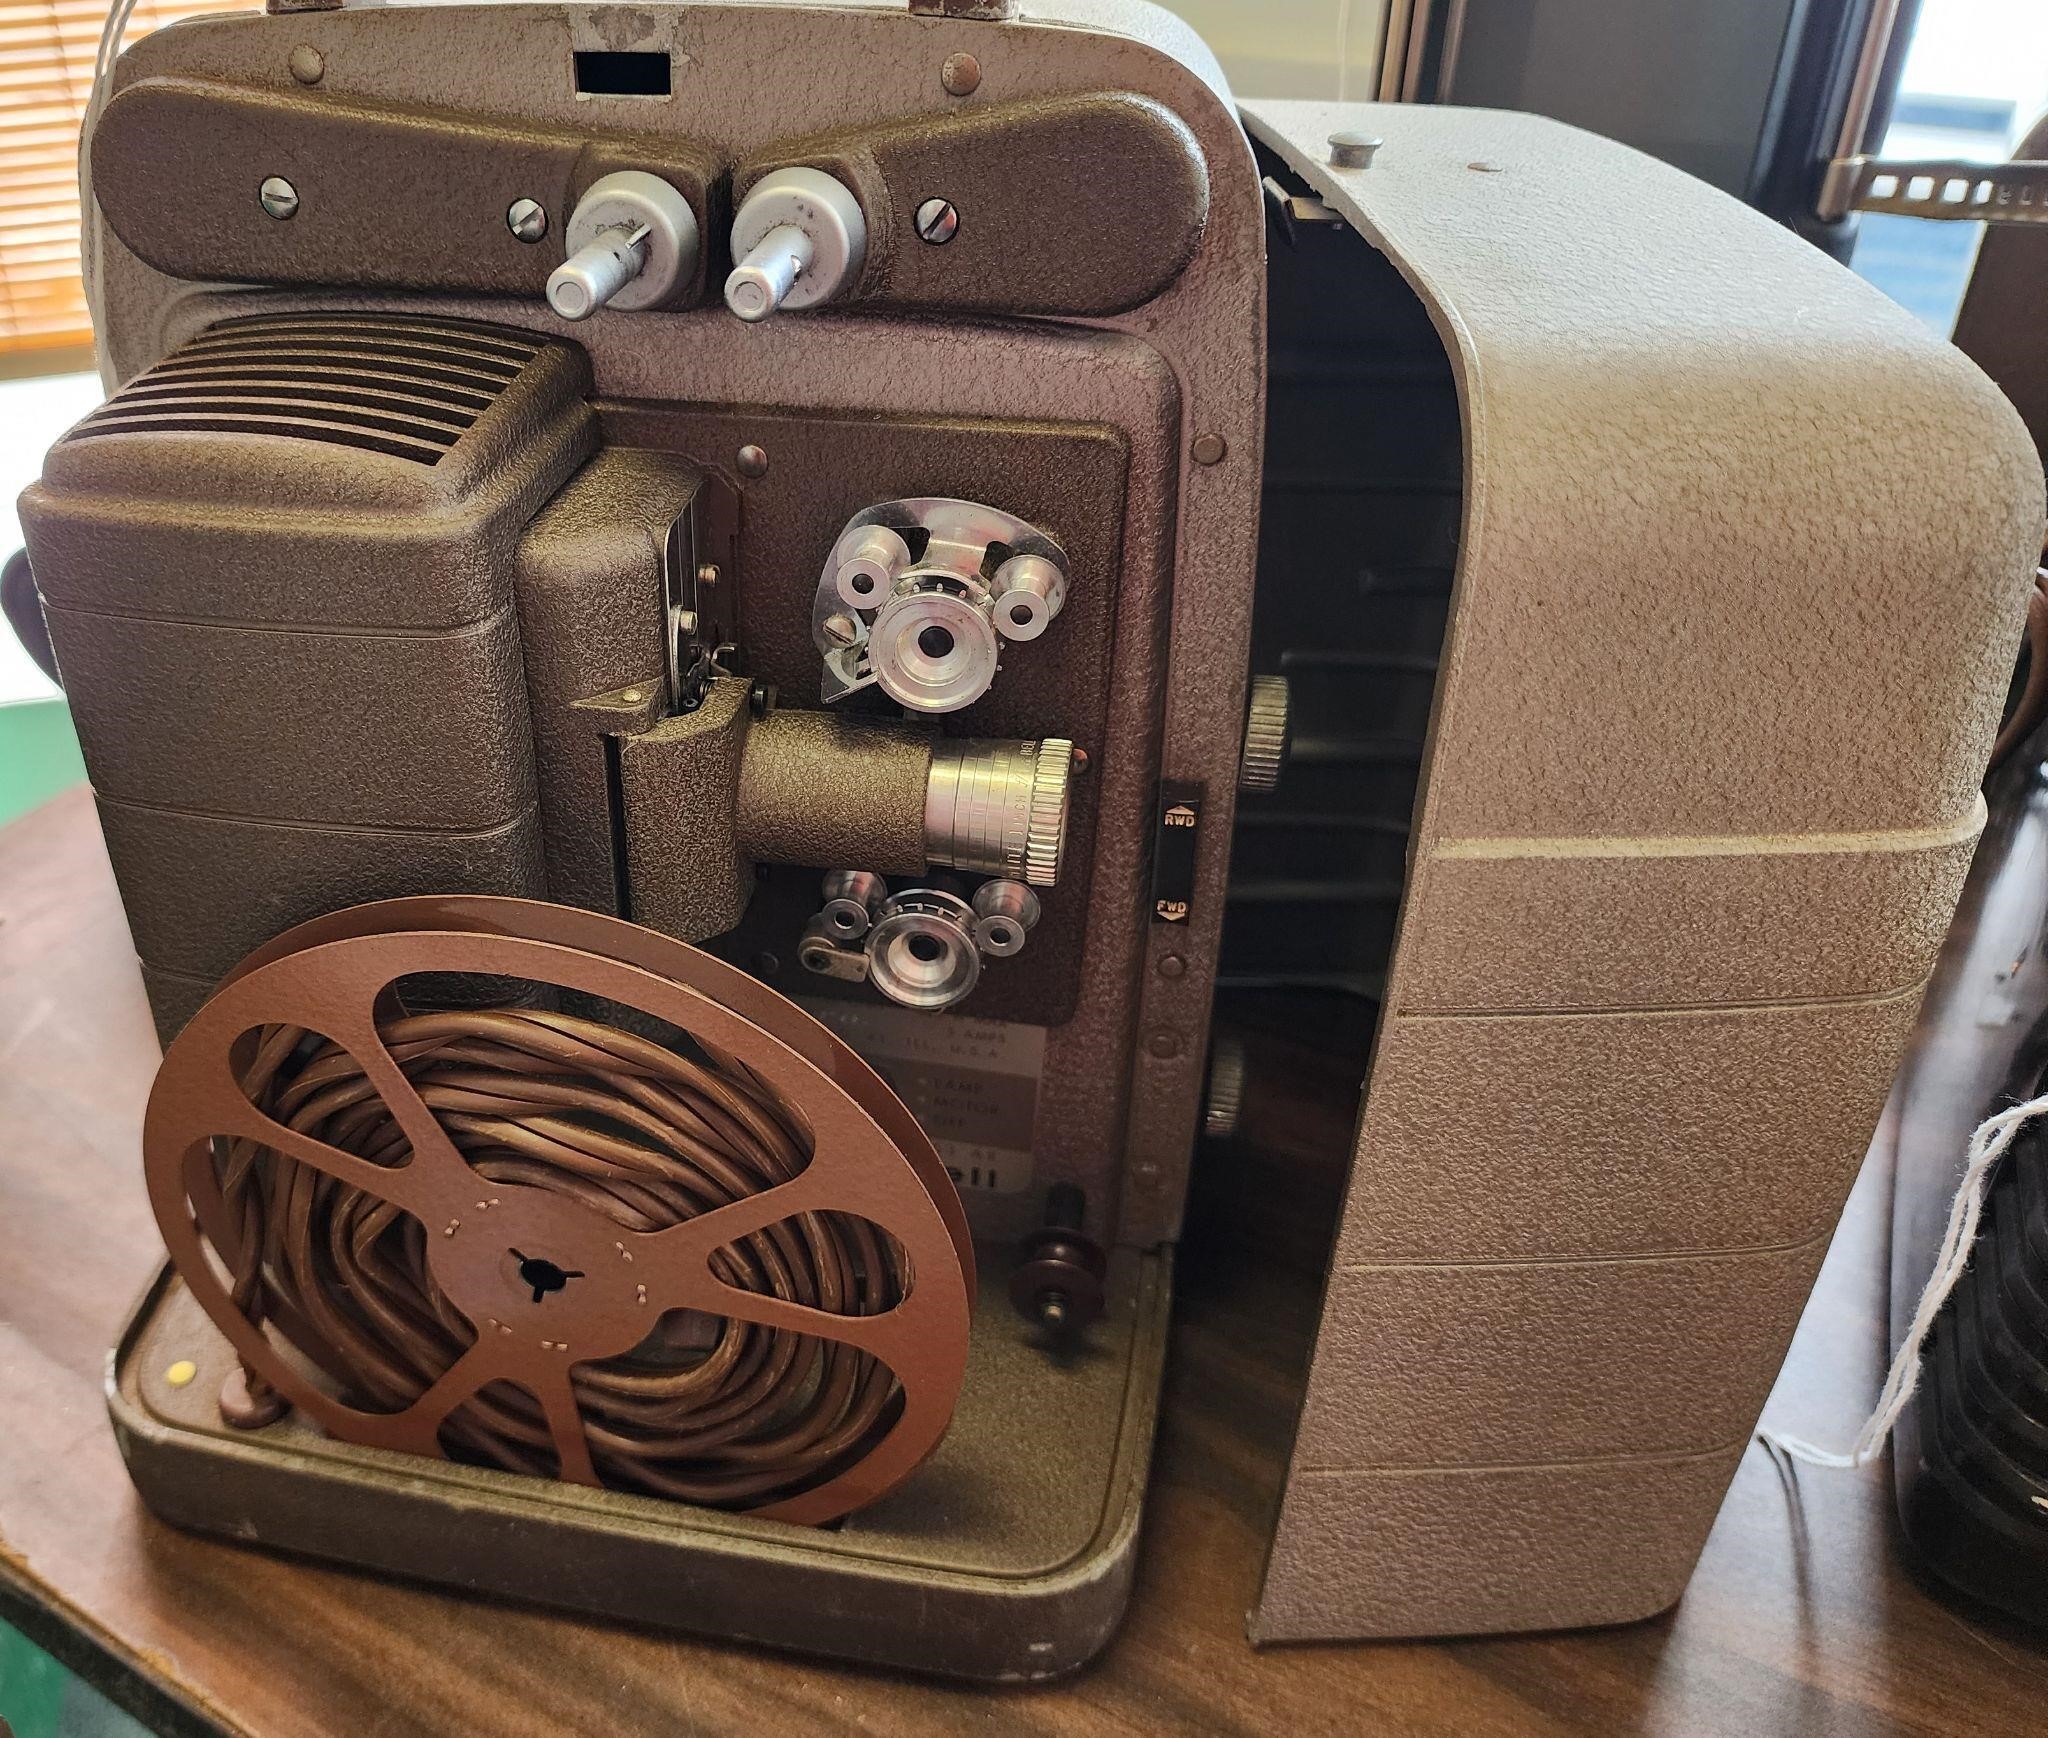 Bell & Howell Movie Projector